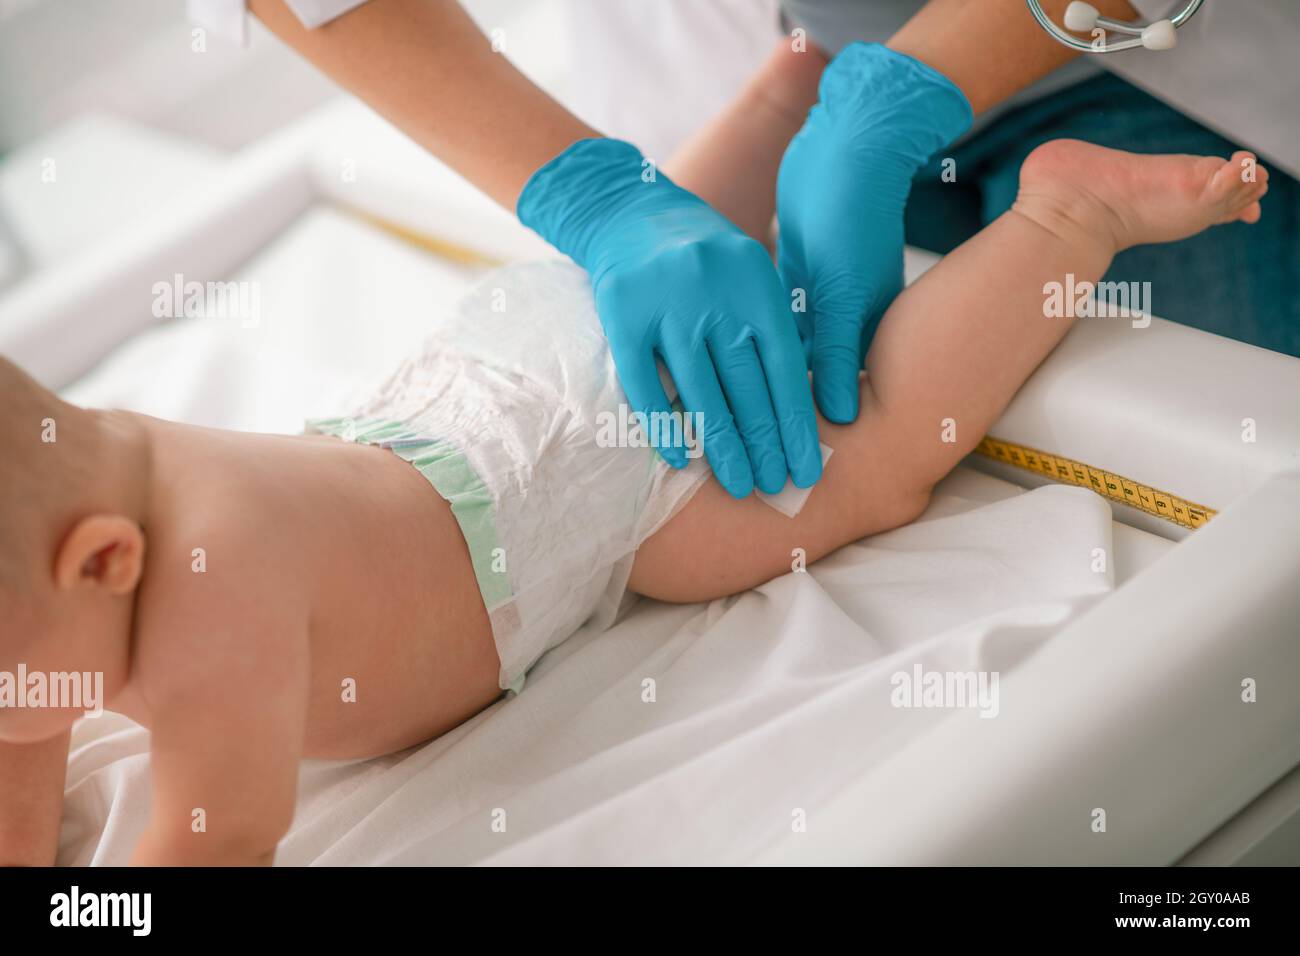 Baby undergoing skin disinfection before a medical procedure Stock Photo